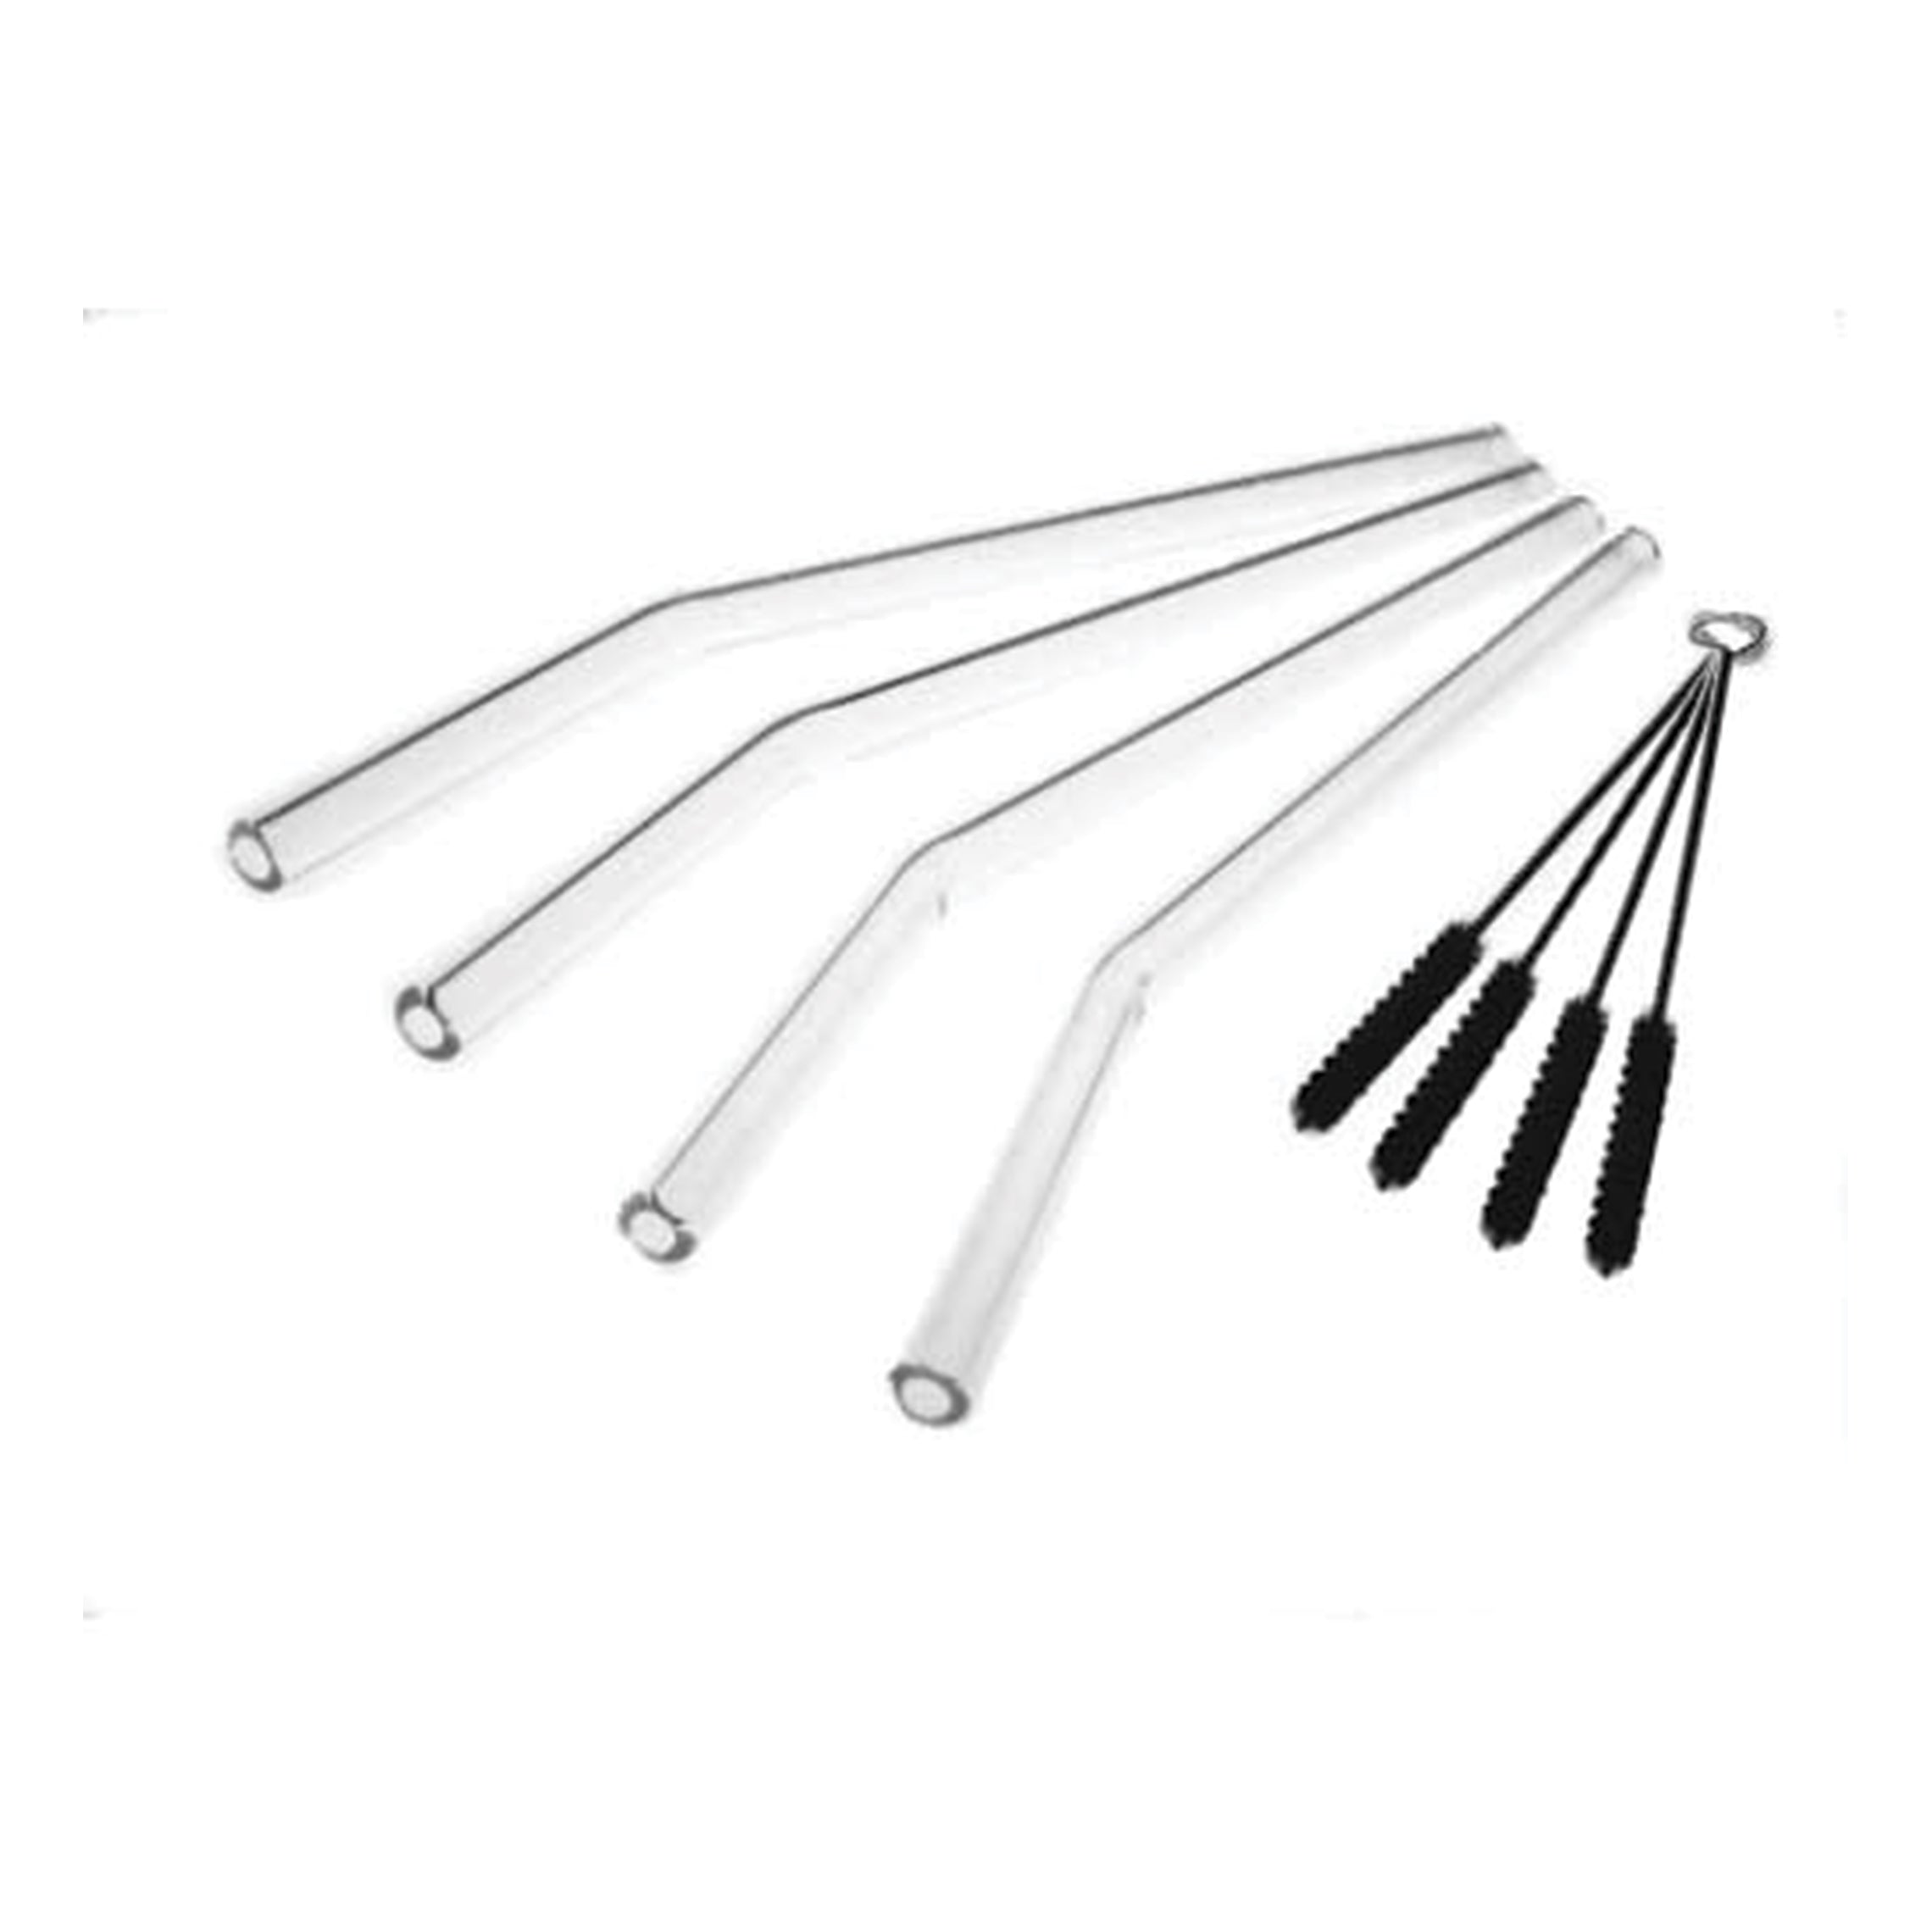 4 Pack of Frog Glass Straws Reusable Straws Glass Straw Glass Drinking Straw  Frog Straws Reusable Glass Straw Frog Gifts 